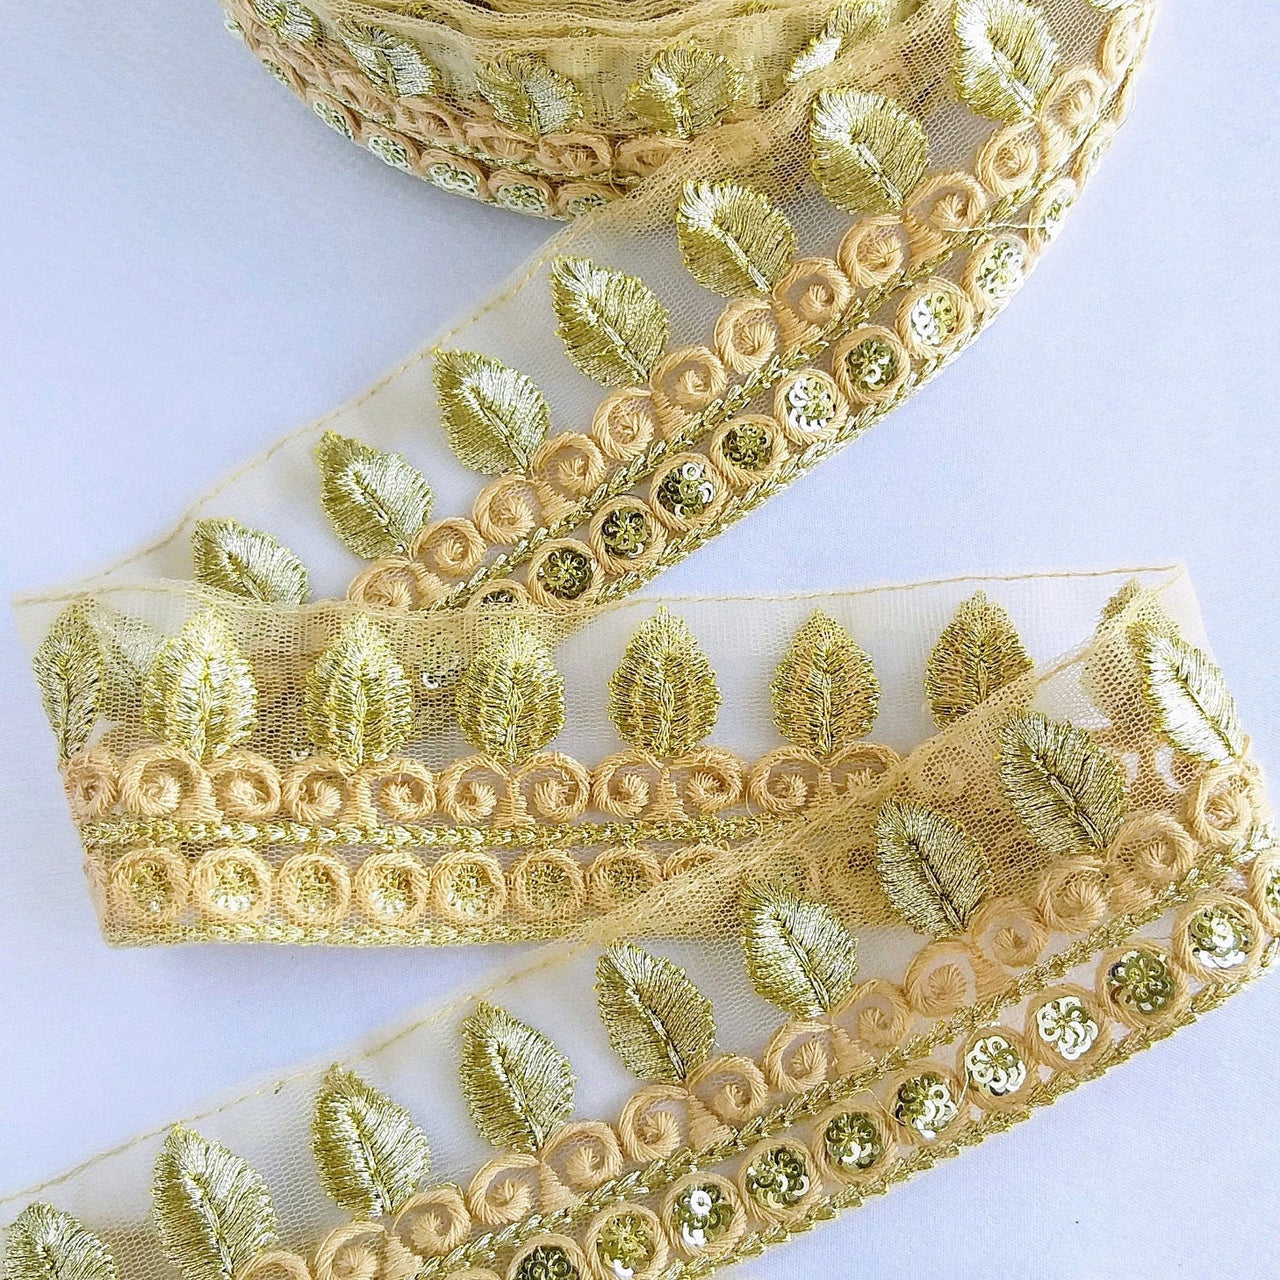 Tan Brown Nude Net Lace Trim With Beautiful  Brown And Gold Embroidery and Gold Sequins, Decorative Trim Costume Fashion Trim, Trim By Yard